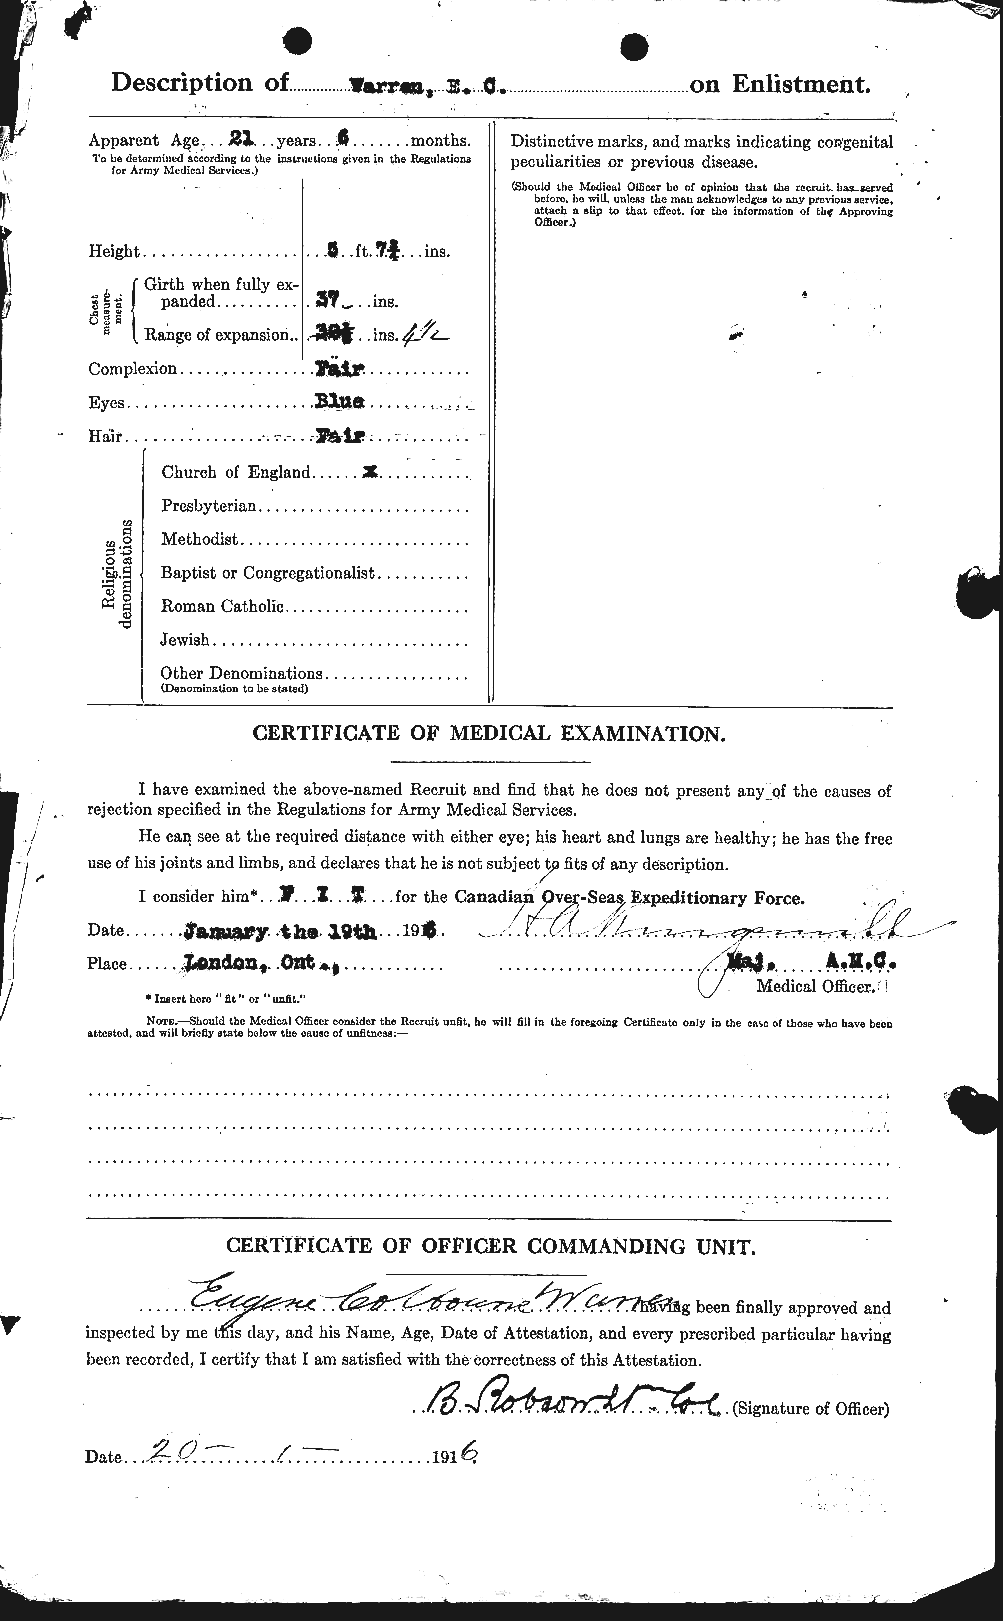 Personnel Records of the First World War - CEF 658425b